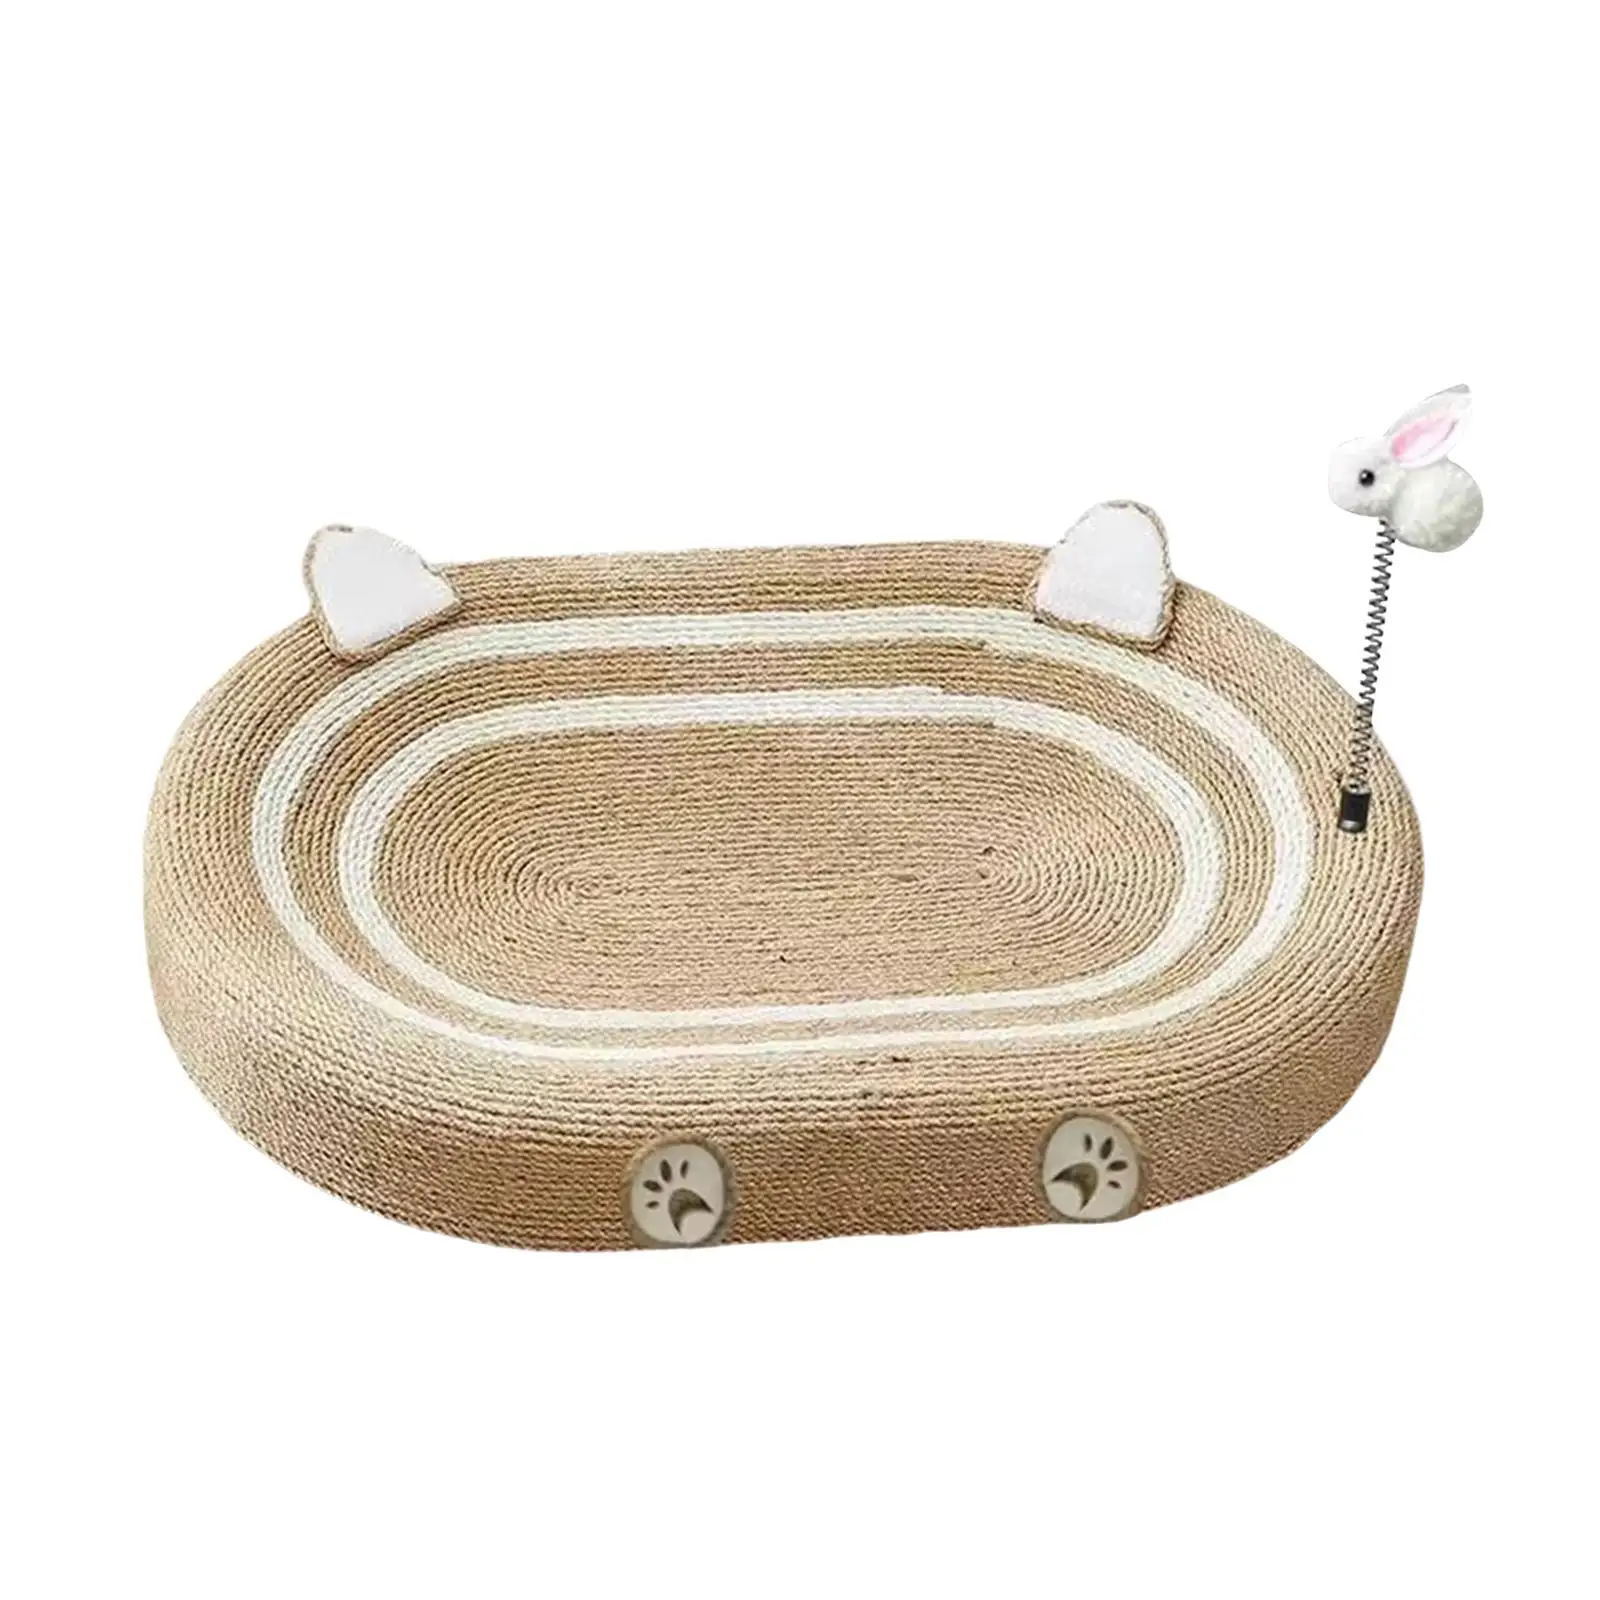 Cat Scratching Board Pet Scratcher Play Toy for Kitty Oval Cat Scratch Pad